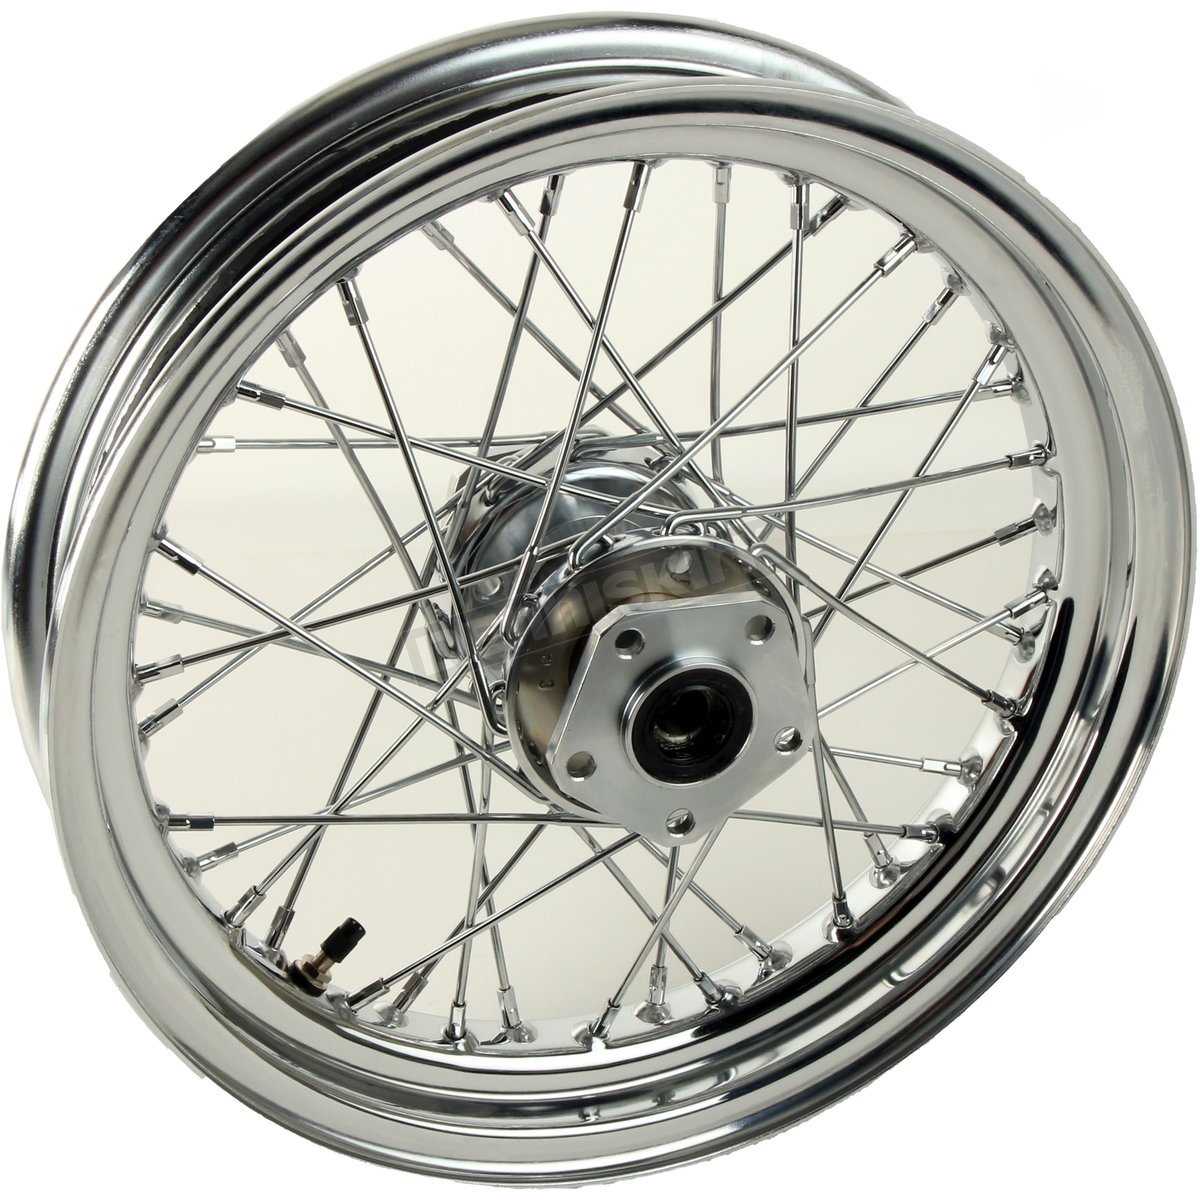 TARAZON 18 x 3.5 Fat Spoke Rear Tubeless Wheel Rim for Harley Softail Dyna with 25mm Axle Bearing Chormed Color Wheel 